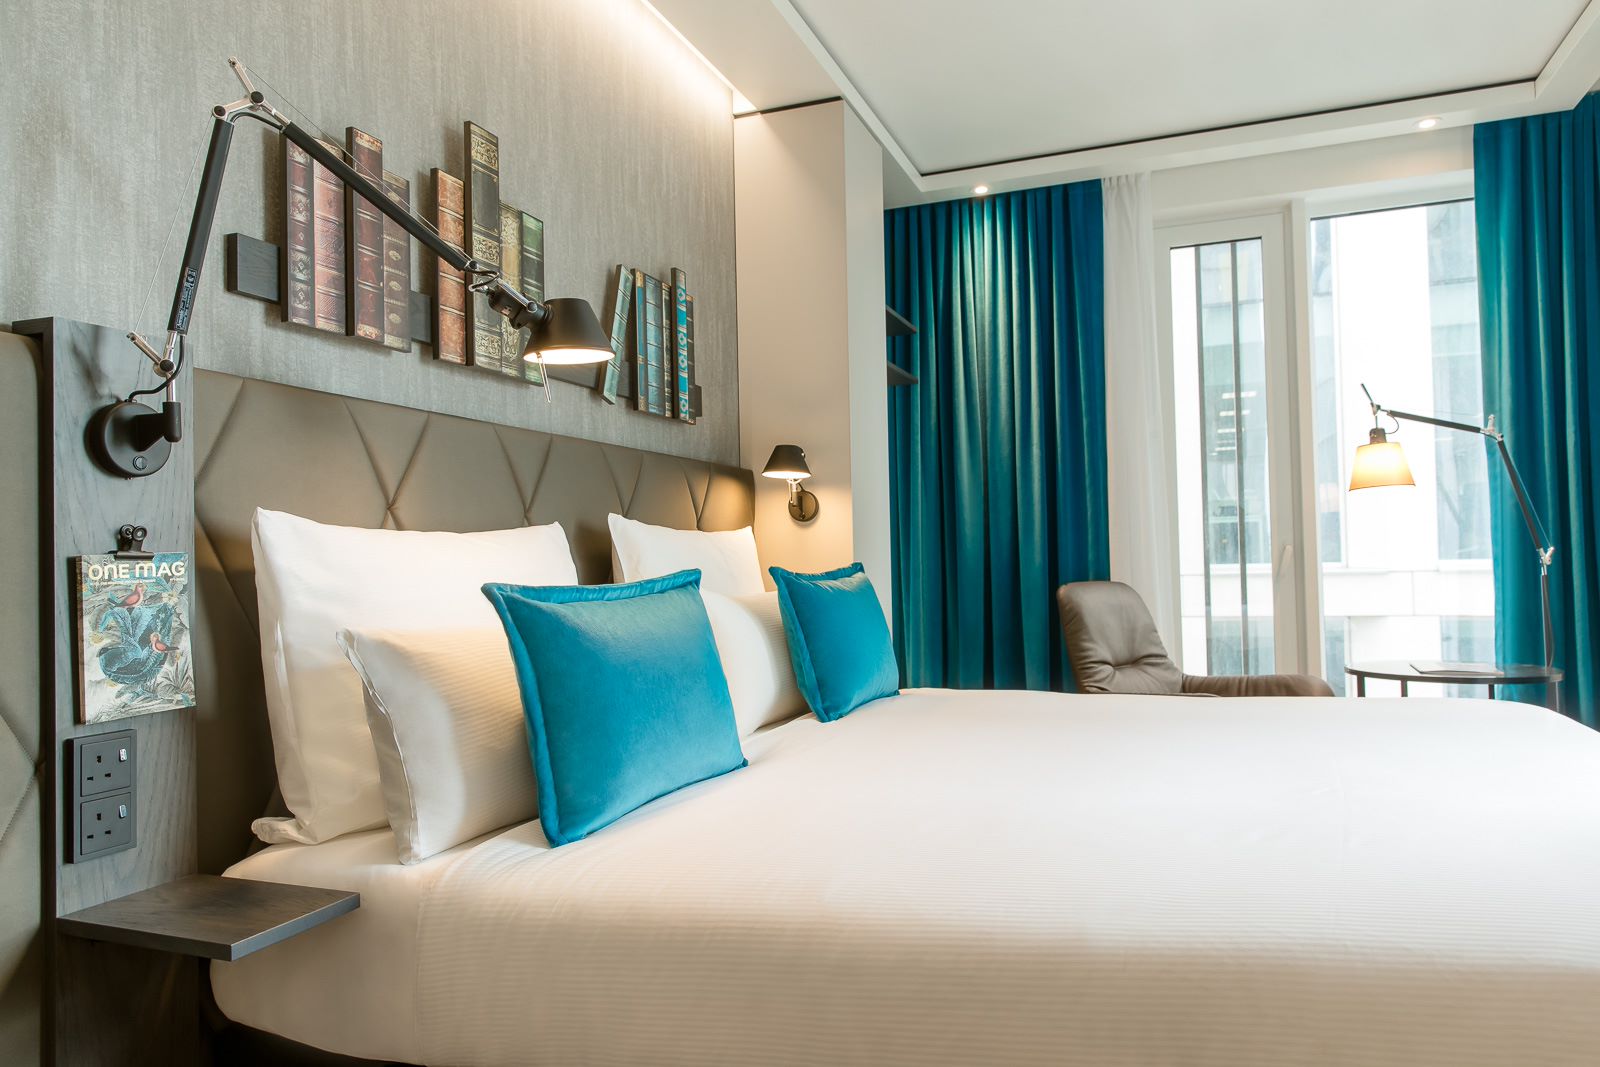 Motel one - St Peters